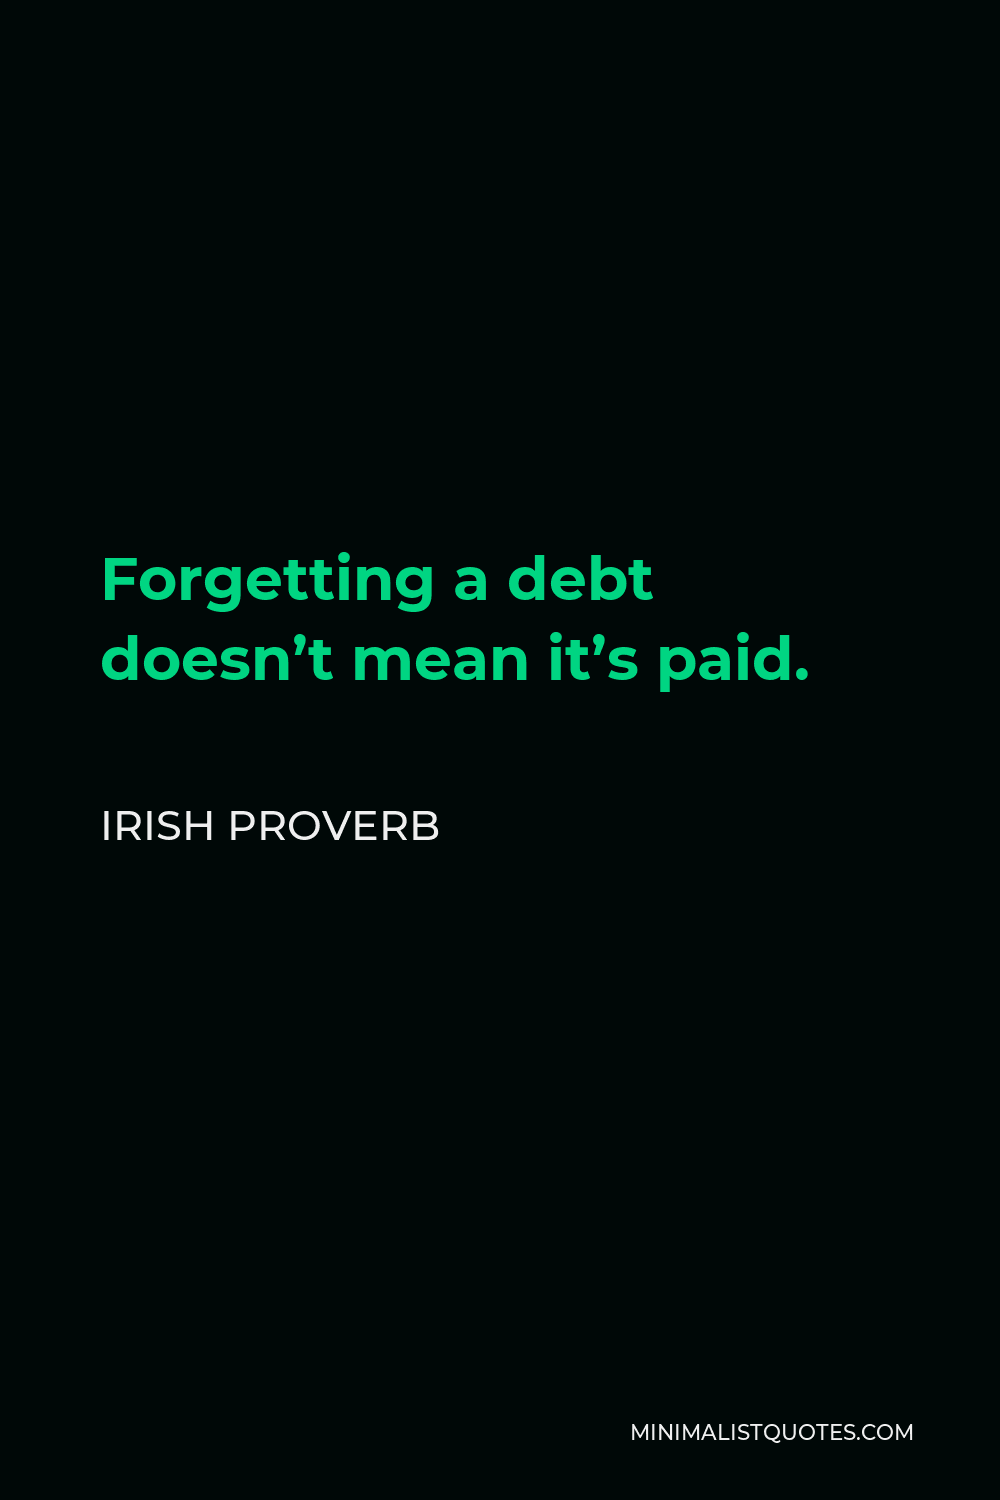 Irish Proverb Quote - Forgetting a debt doesn’t mean it’s paid.